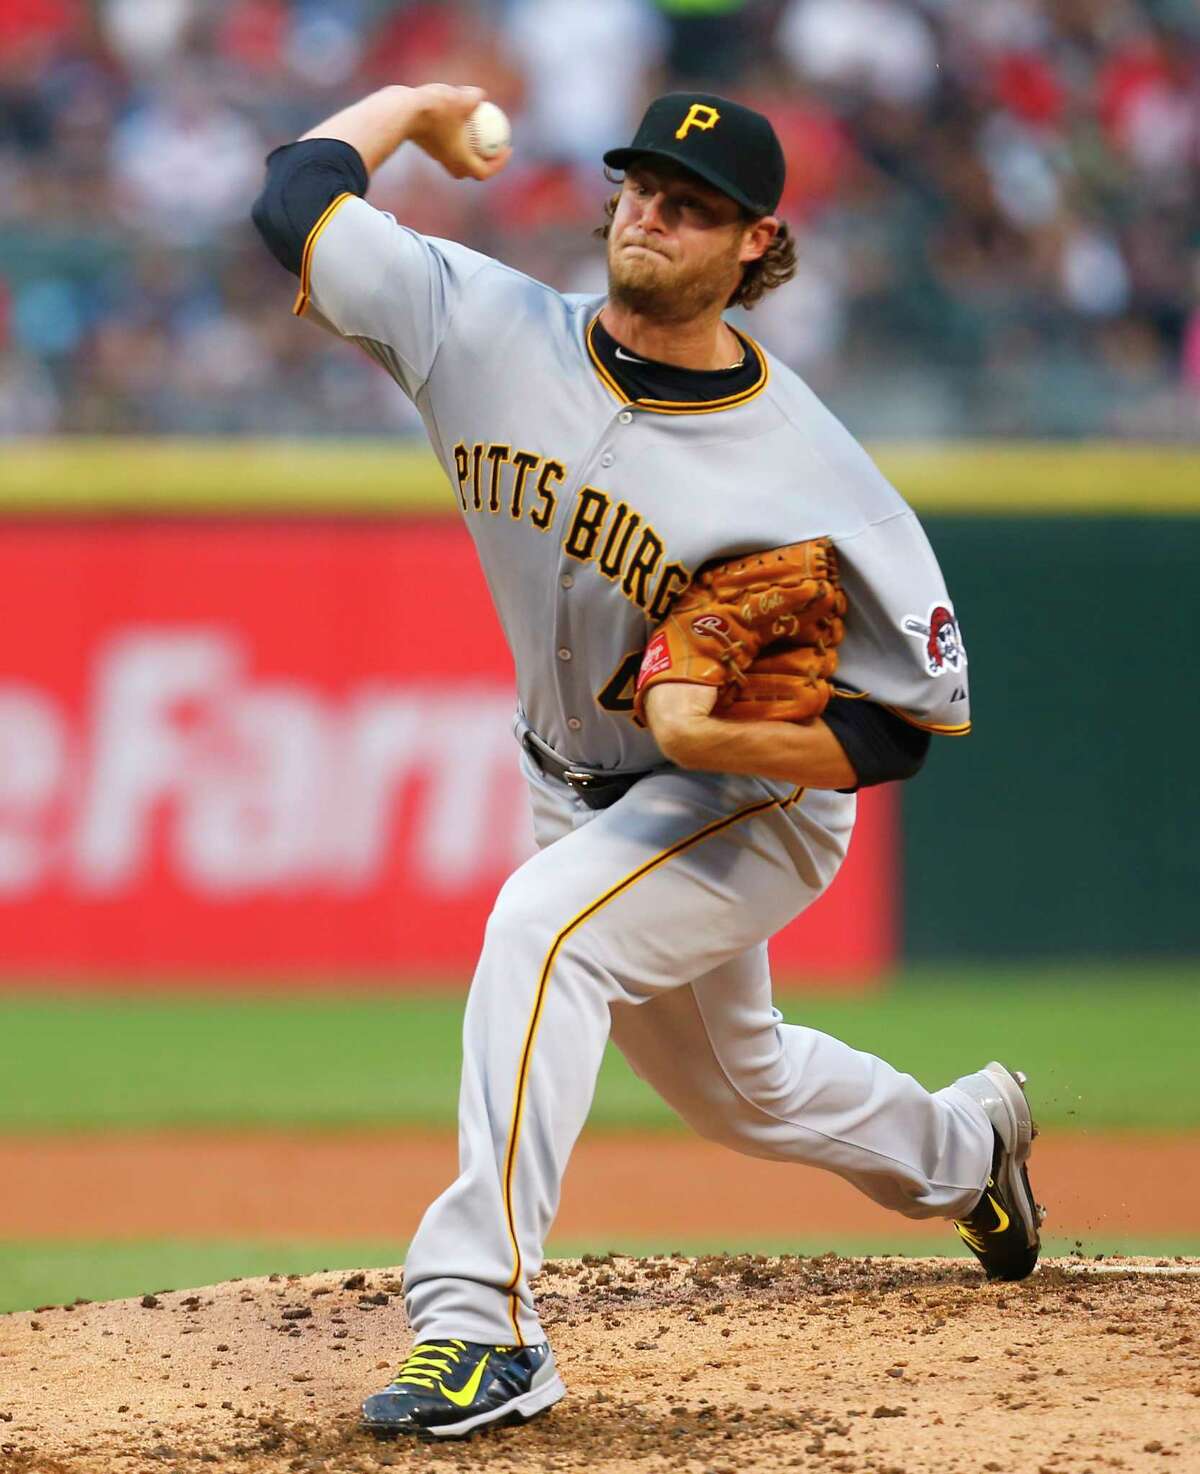 Gerrit Cole, who won 19 games for the Pirates in 2015 and isn't eligible for free agency until after the 2019 season, might be on the trade market if Pittsburgh deems itself a non-contender.